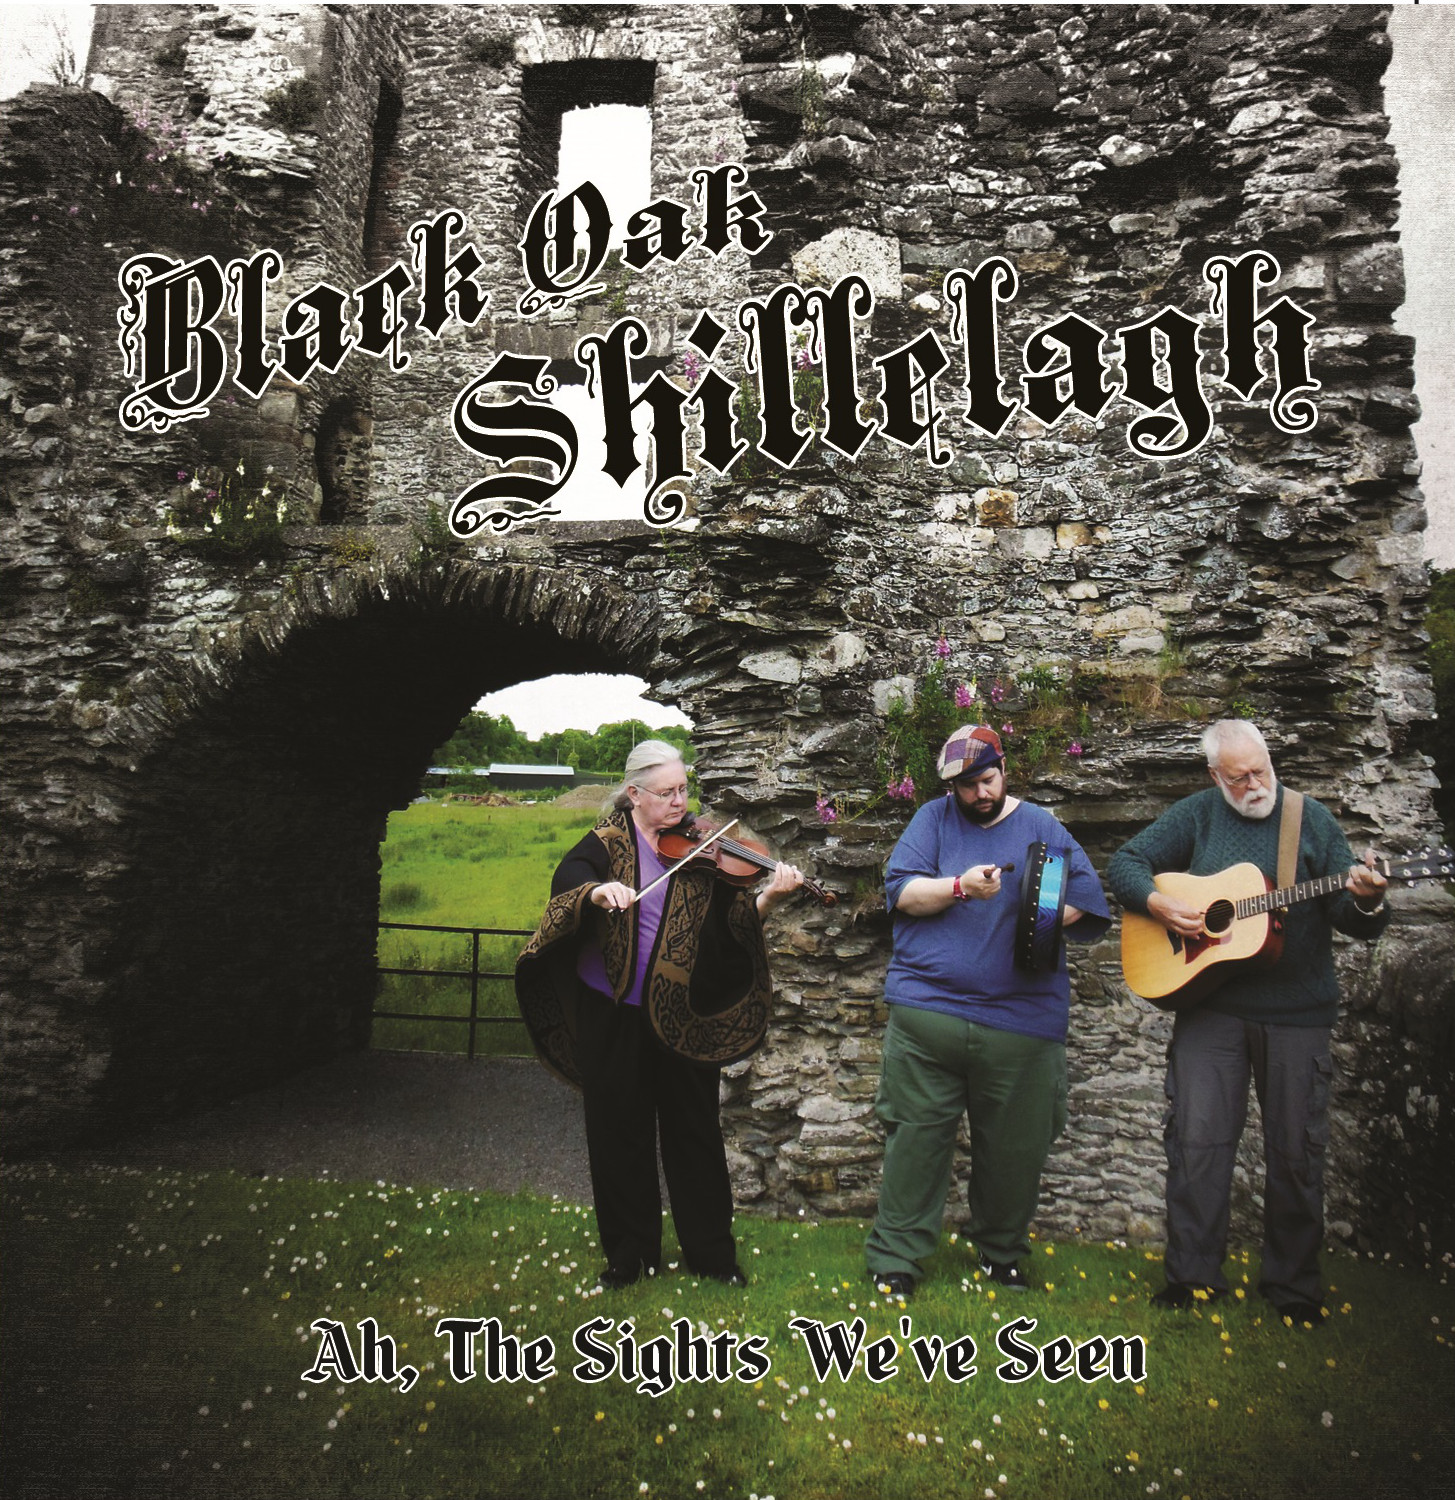 Front cover of Ah, The Sights We've Seen CD